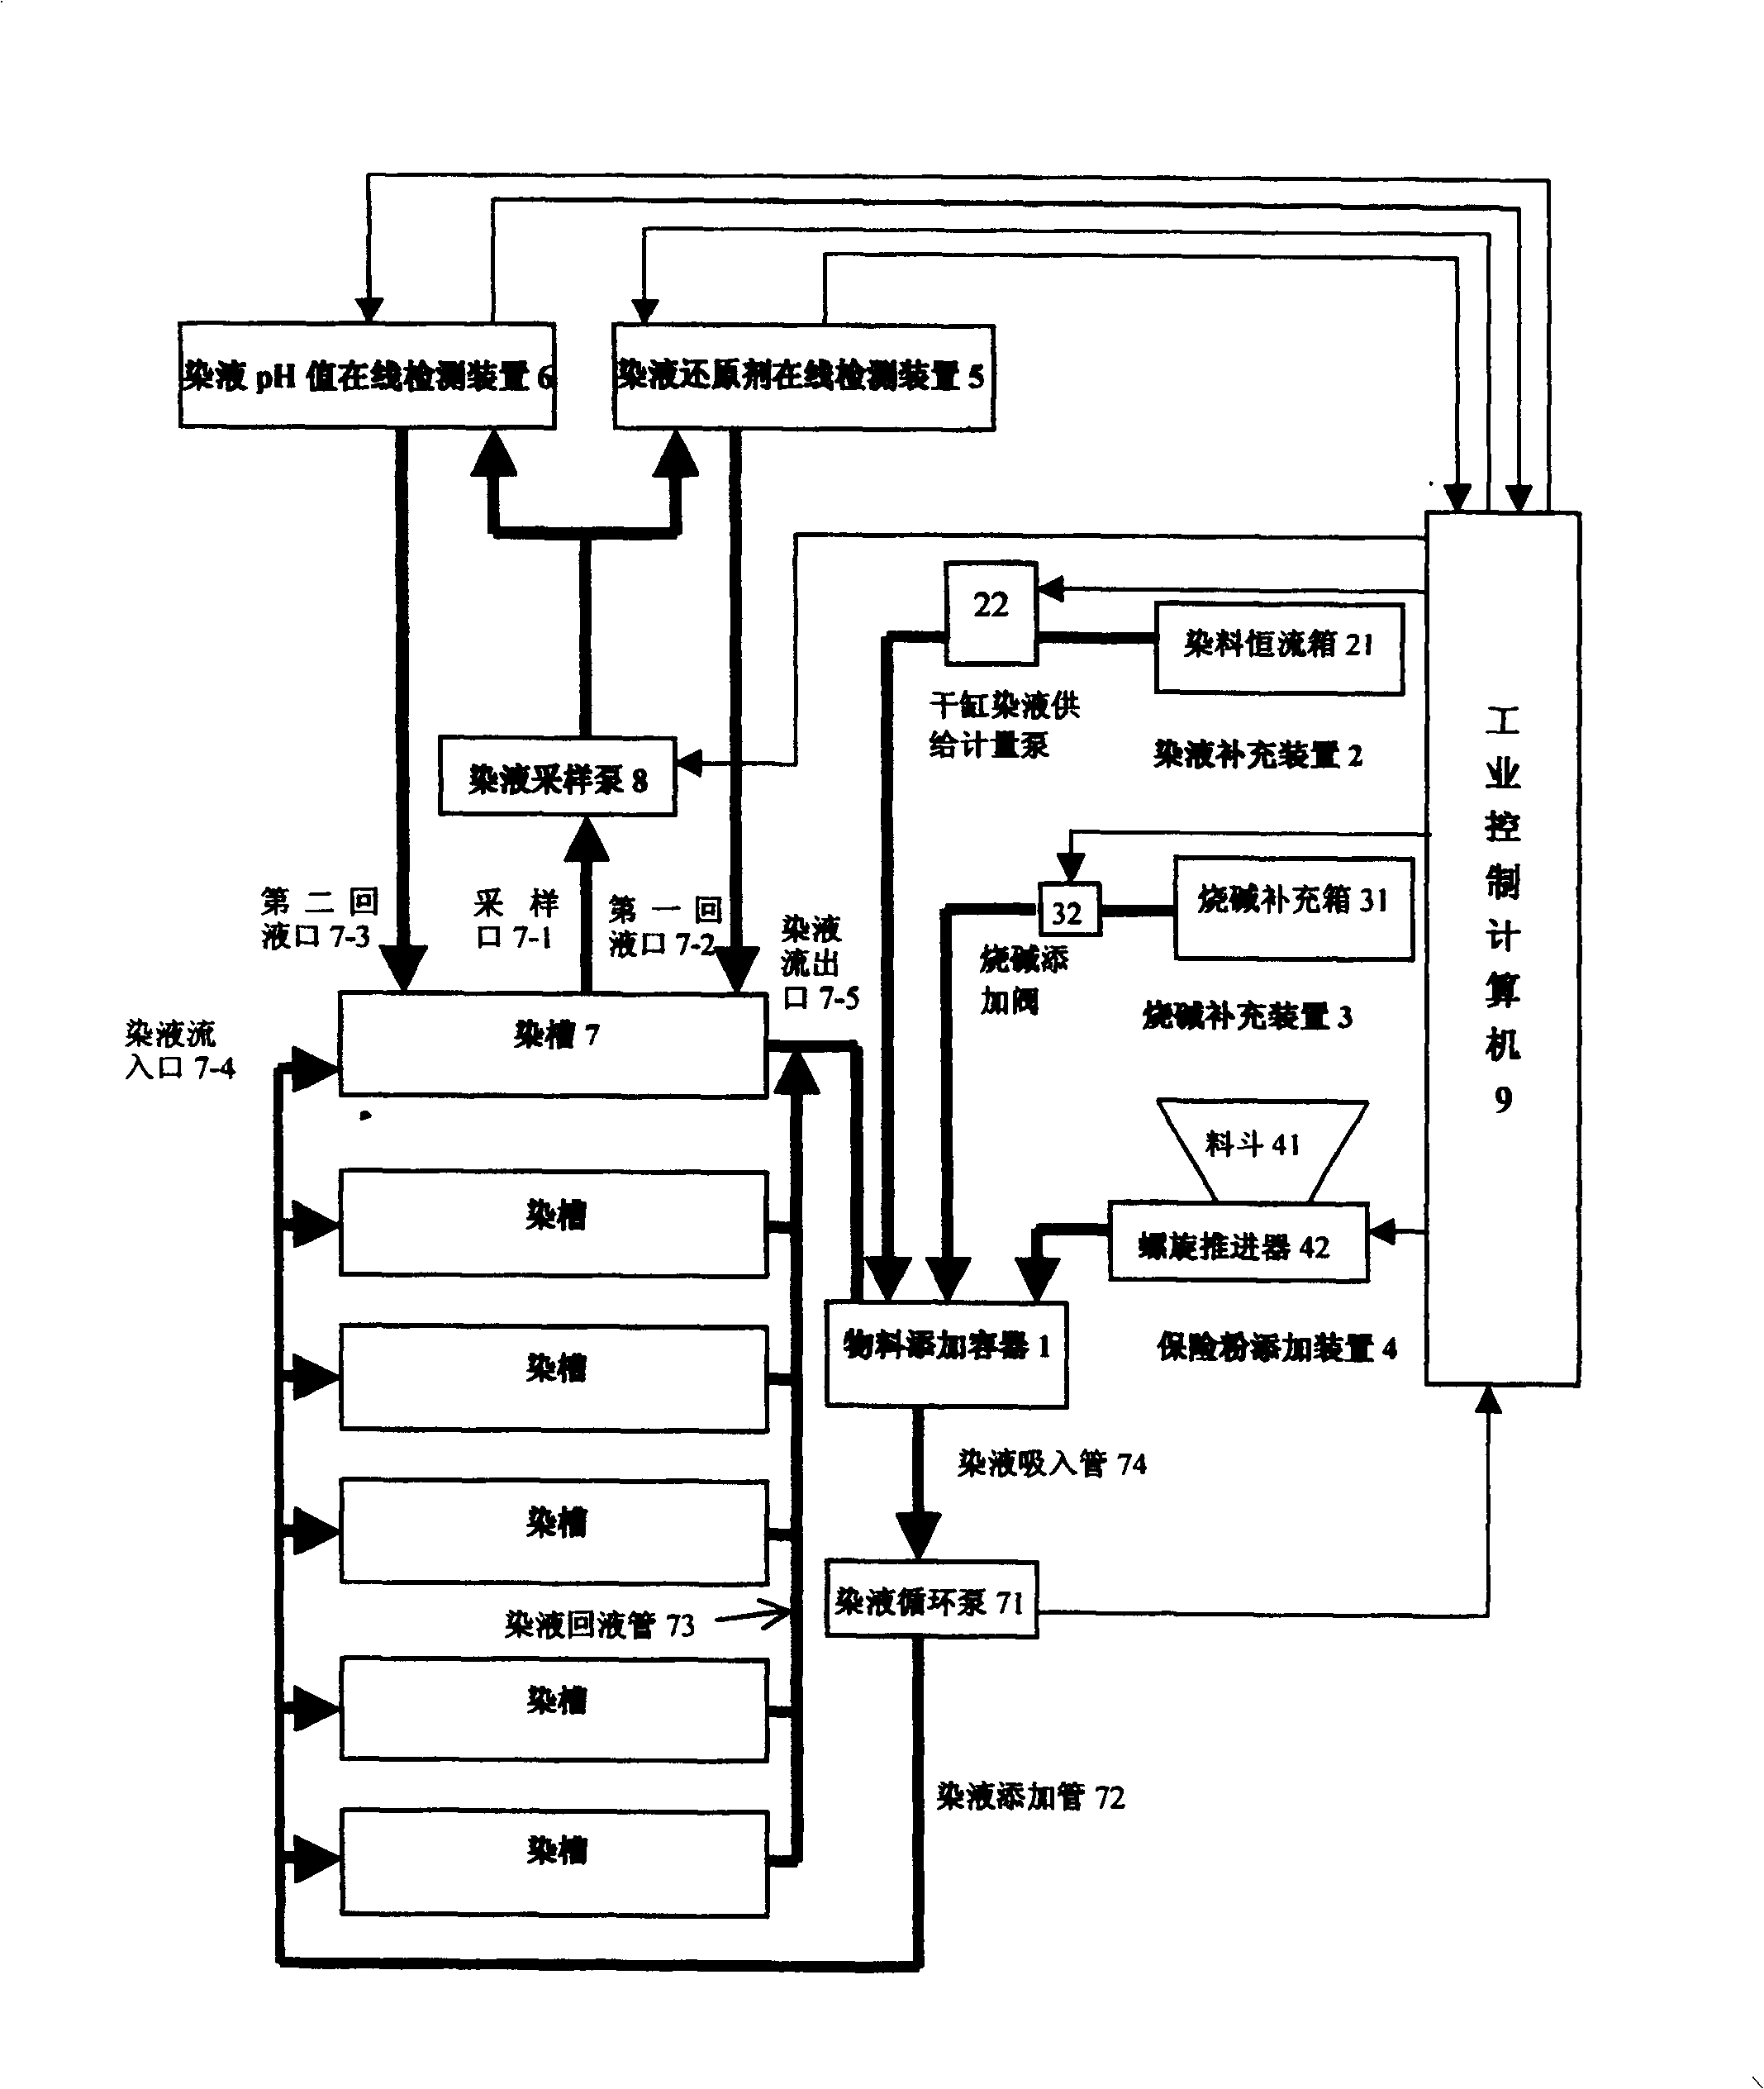 System for inspecting and controlling dyeing liquid component of dyeing machine on-line